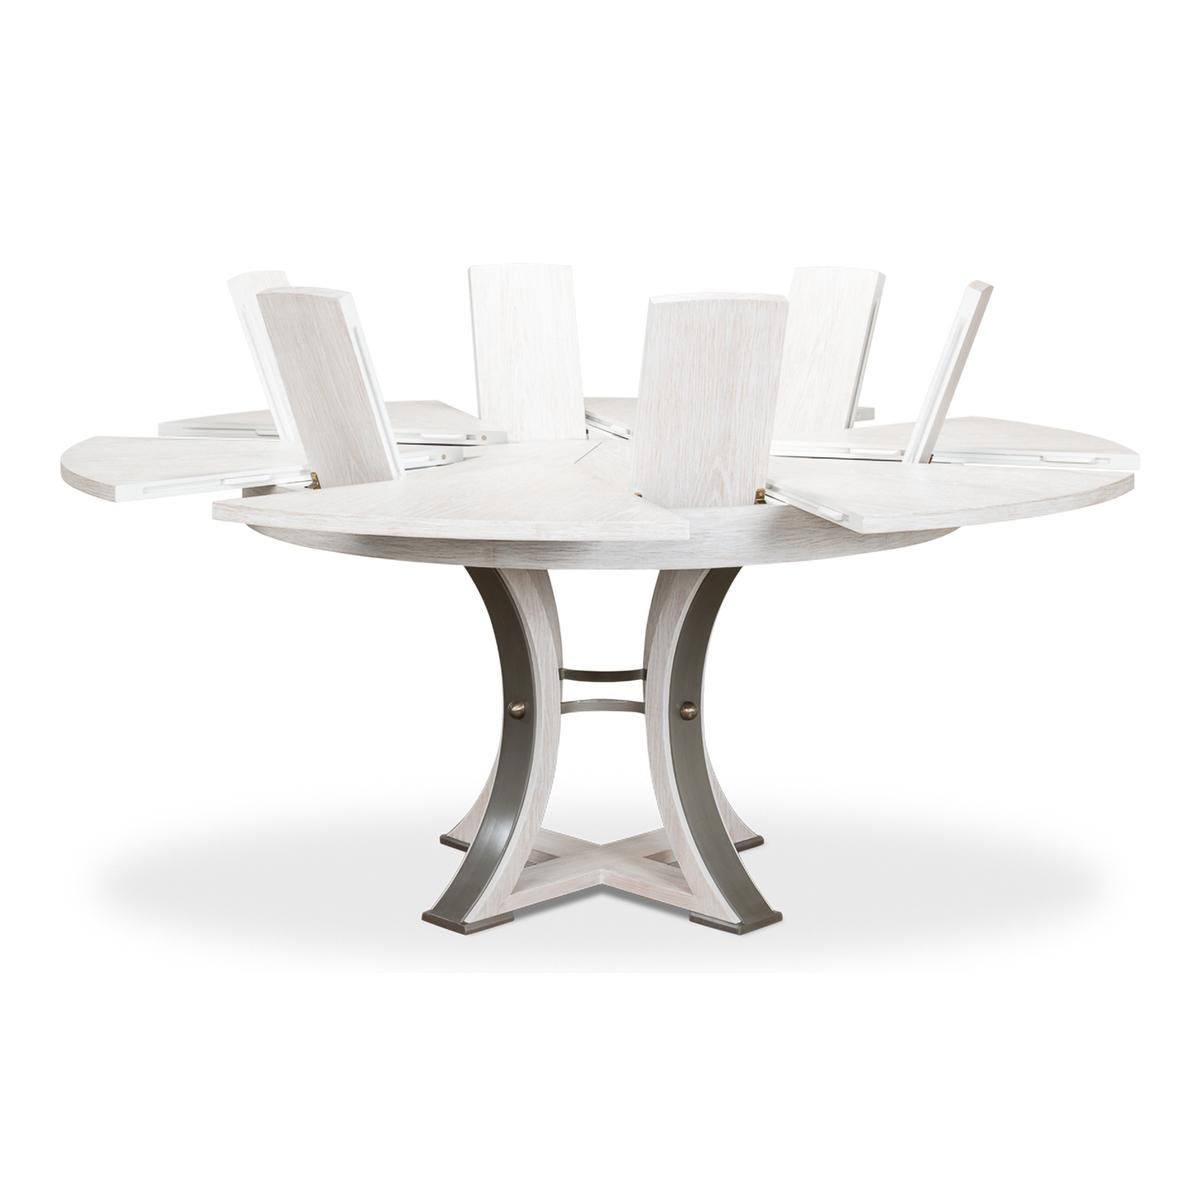 Modern Industrial Dining Table - 70 - White In New Condition For Sale In Westwood, NJ